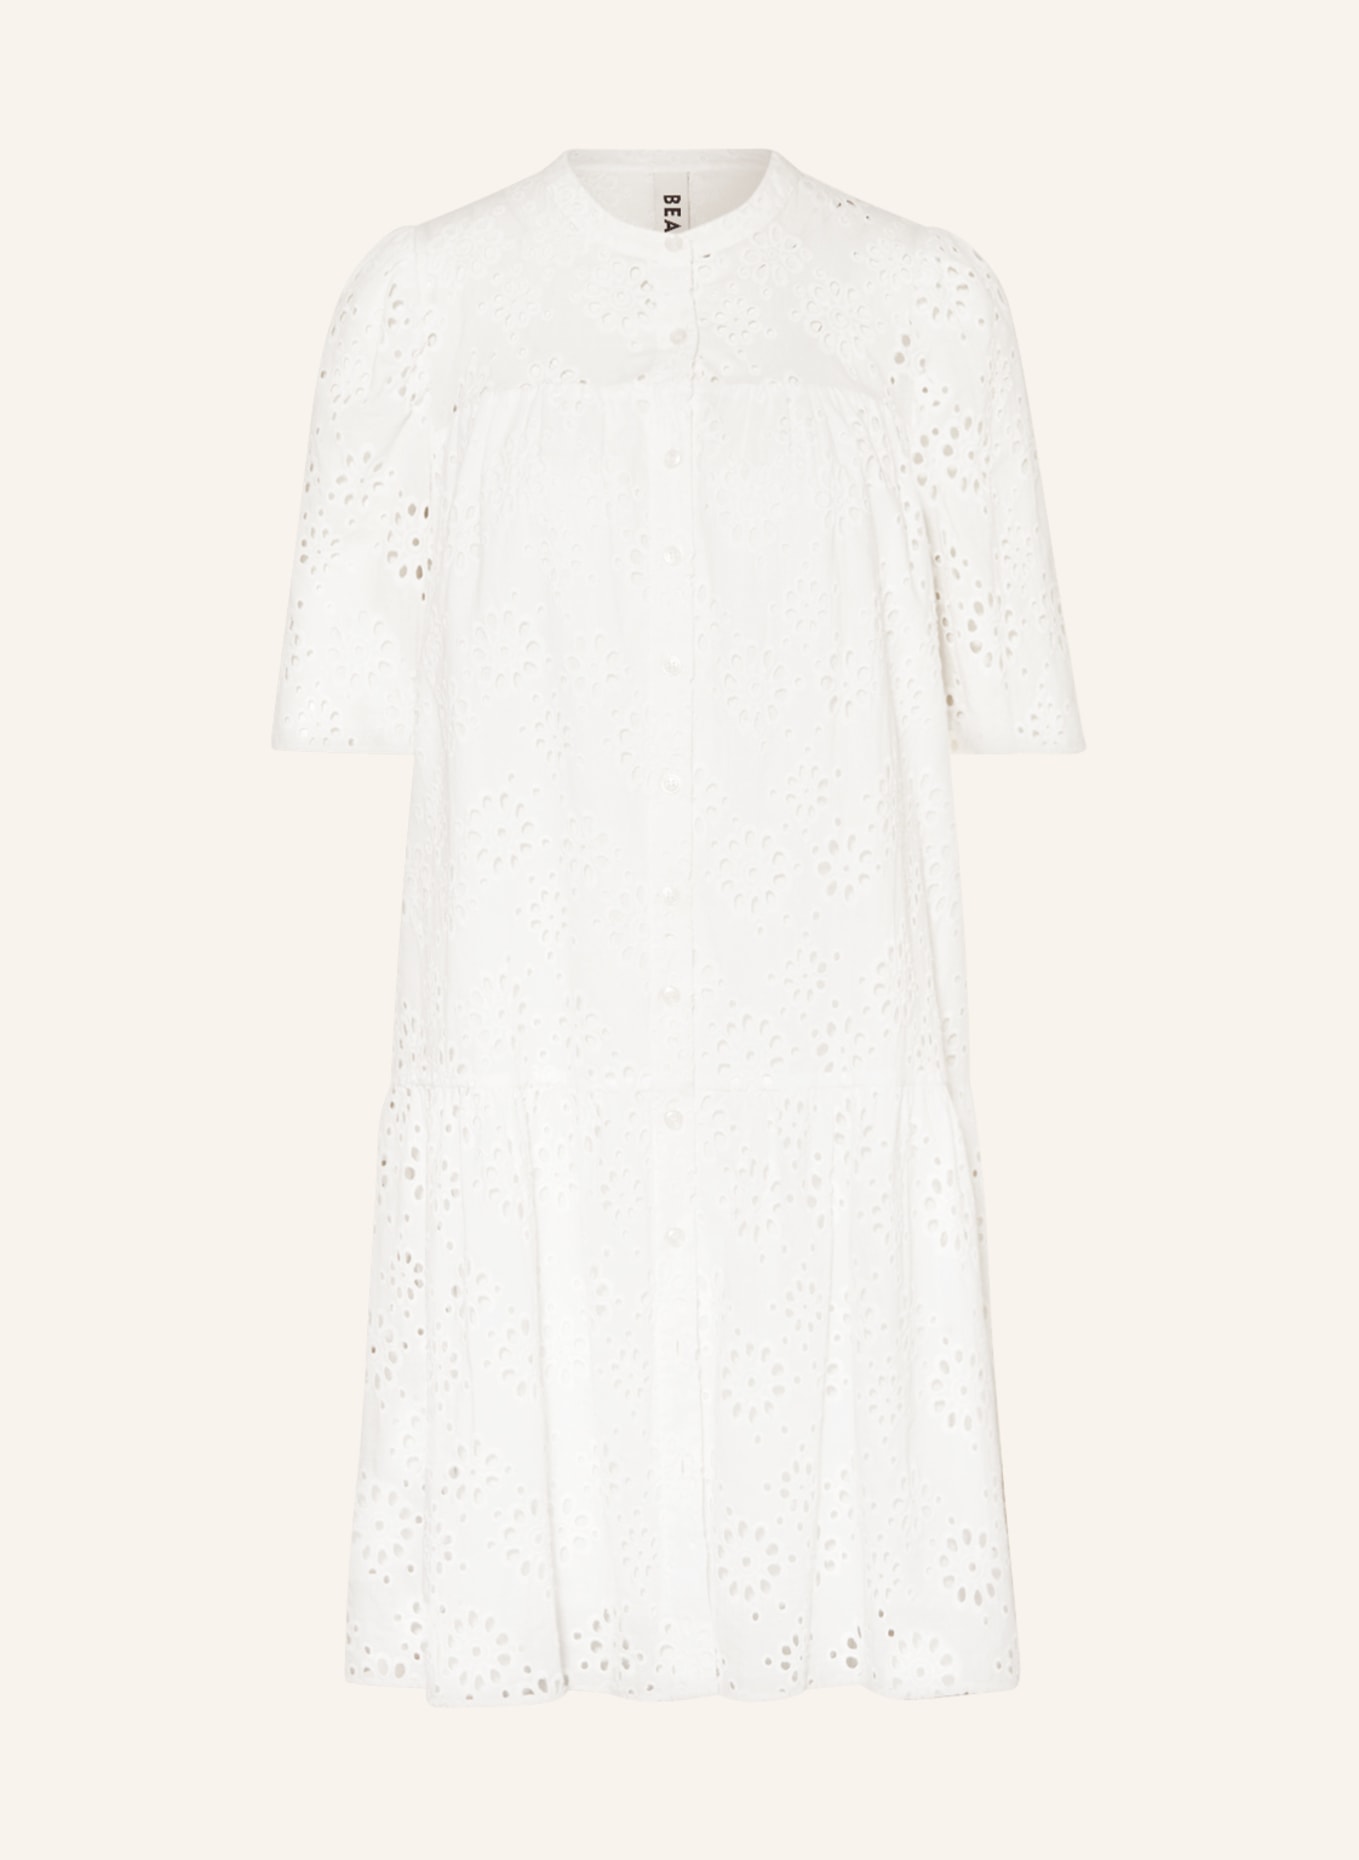 BEAUMONT Shirt dress BETH made of broderie anglaise, Color: WHITE (Image 1)